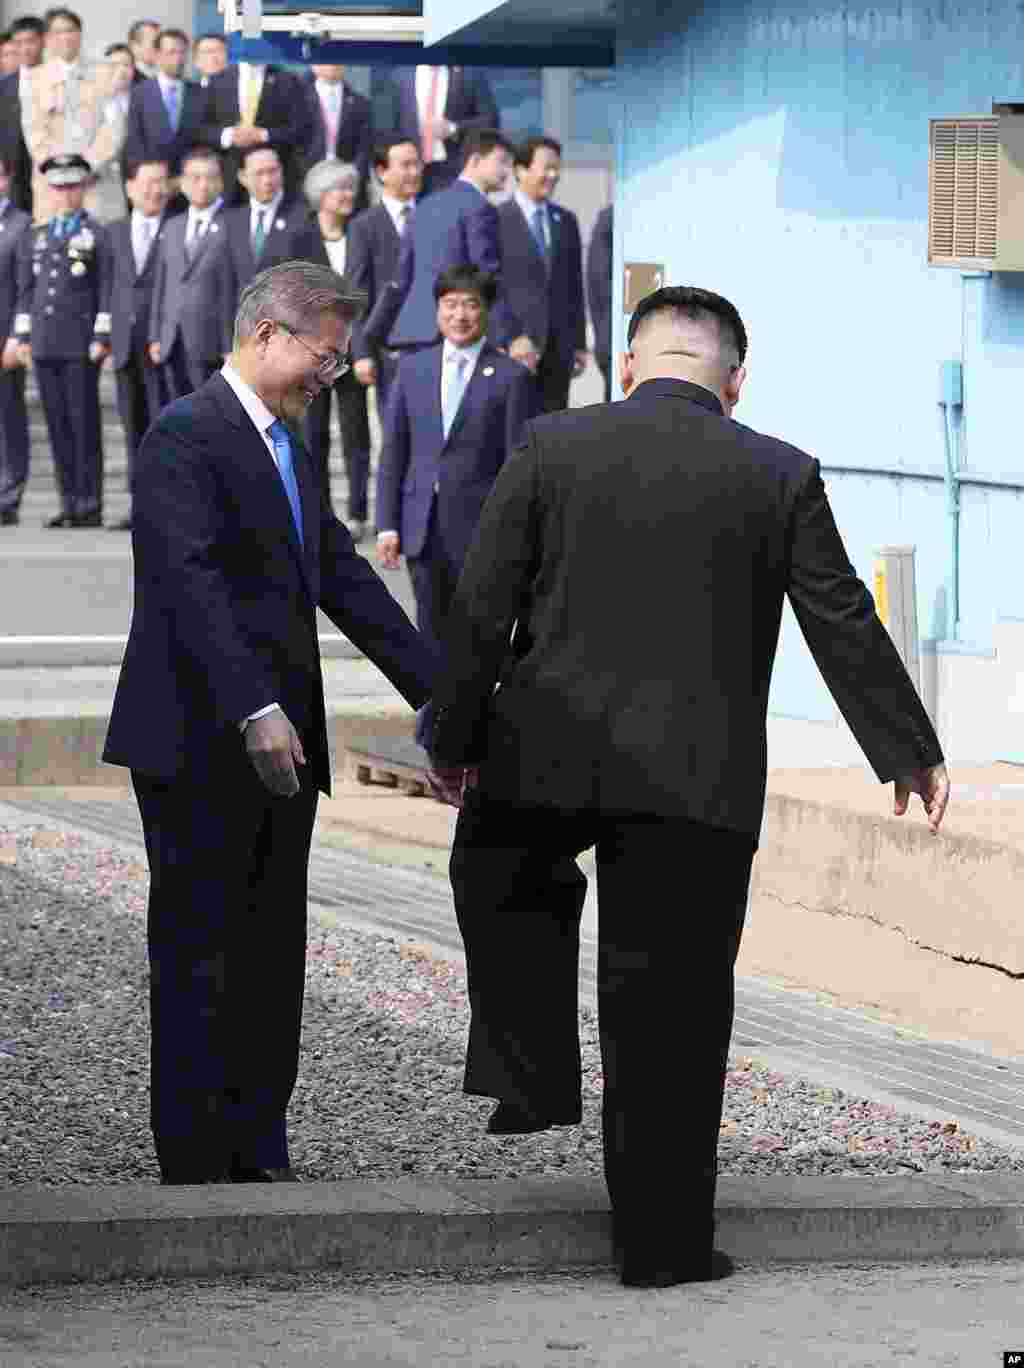 North Korean leader Kim Jong Un crosses the military demarcation line to meet with South Korean President Moon Jae-in at the border village of Panmunjom in the Demilitarized Zone, April 27, 2018.